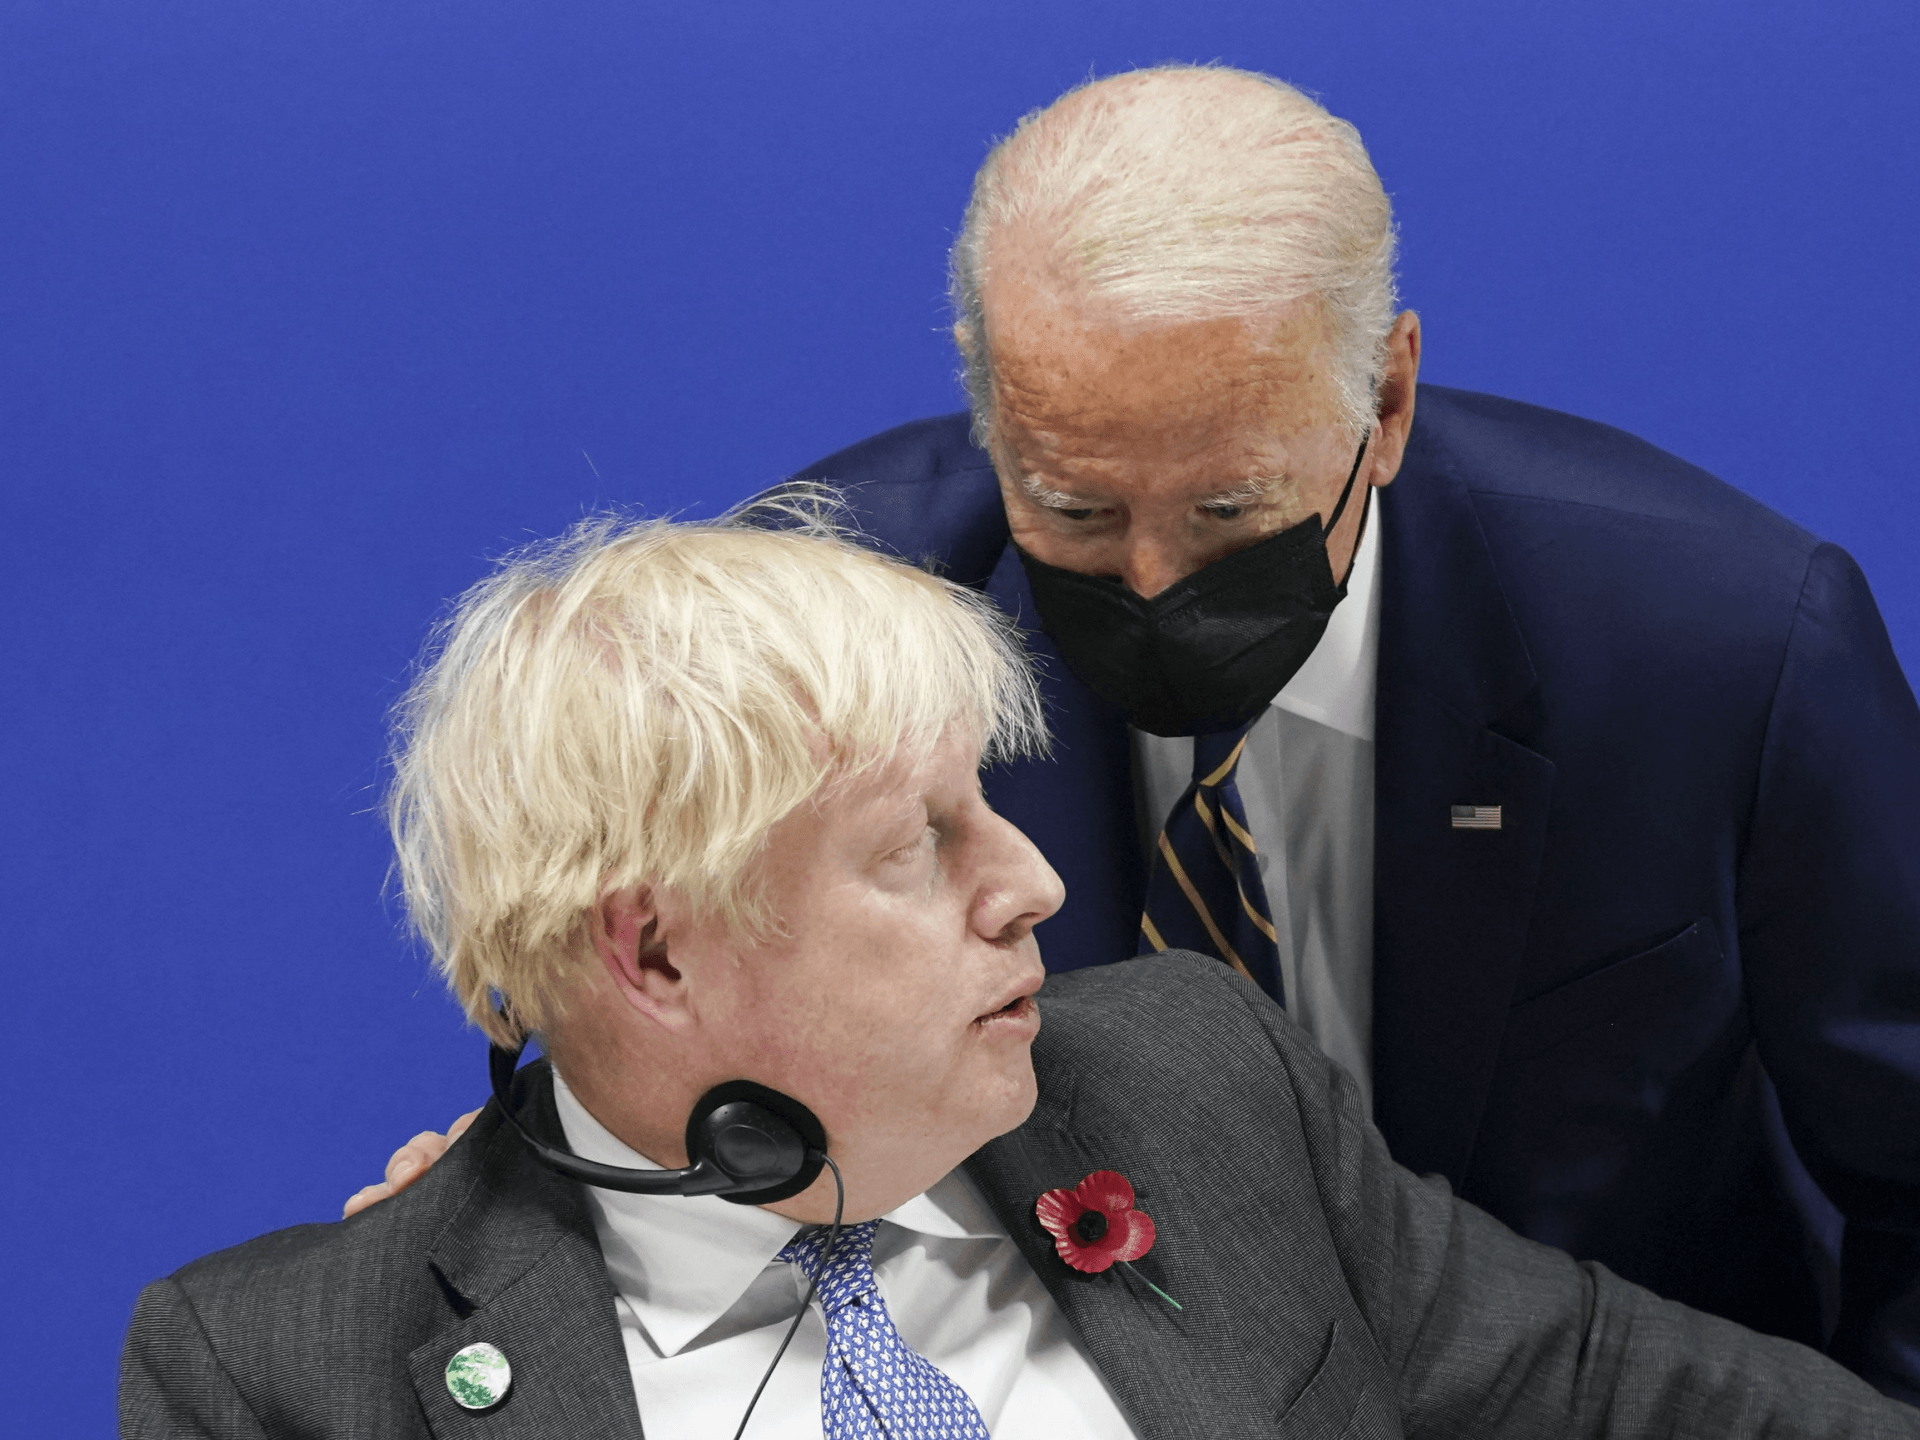 Britain's Prime Minister Boris Johnson (L) listens to U.S. President Joe Biden as they attend a meeting focused on action and solidarity at the UN Climate Change Conference (COP26) in Glasgow, on November 1, 2021. - COP26, running from October 31 to November 12, 2021 in Glasgow, will be the biggest climate conference since the 2015 Paris summit and is seen as crucial in setting worldwide emission targets to slow global warming, as well as firming up other key commitments. (Photo by KEVIN LAMARQUE / POOL / AFP) (Photo by KEVIN LAMARQUE/POOL/AFP via Getty Images)